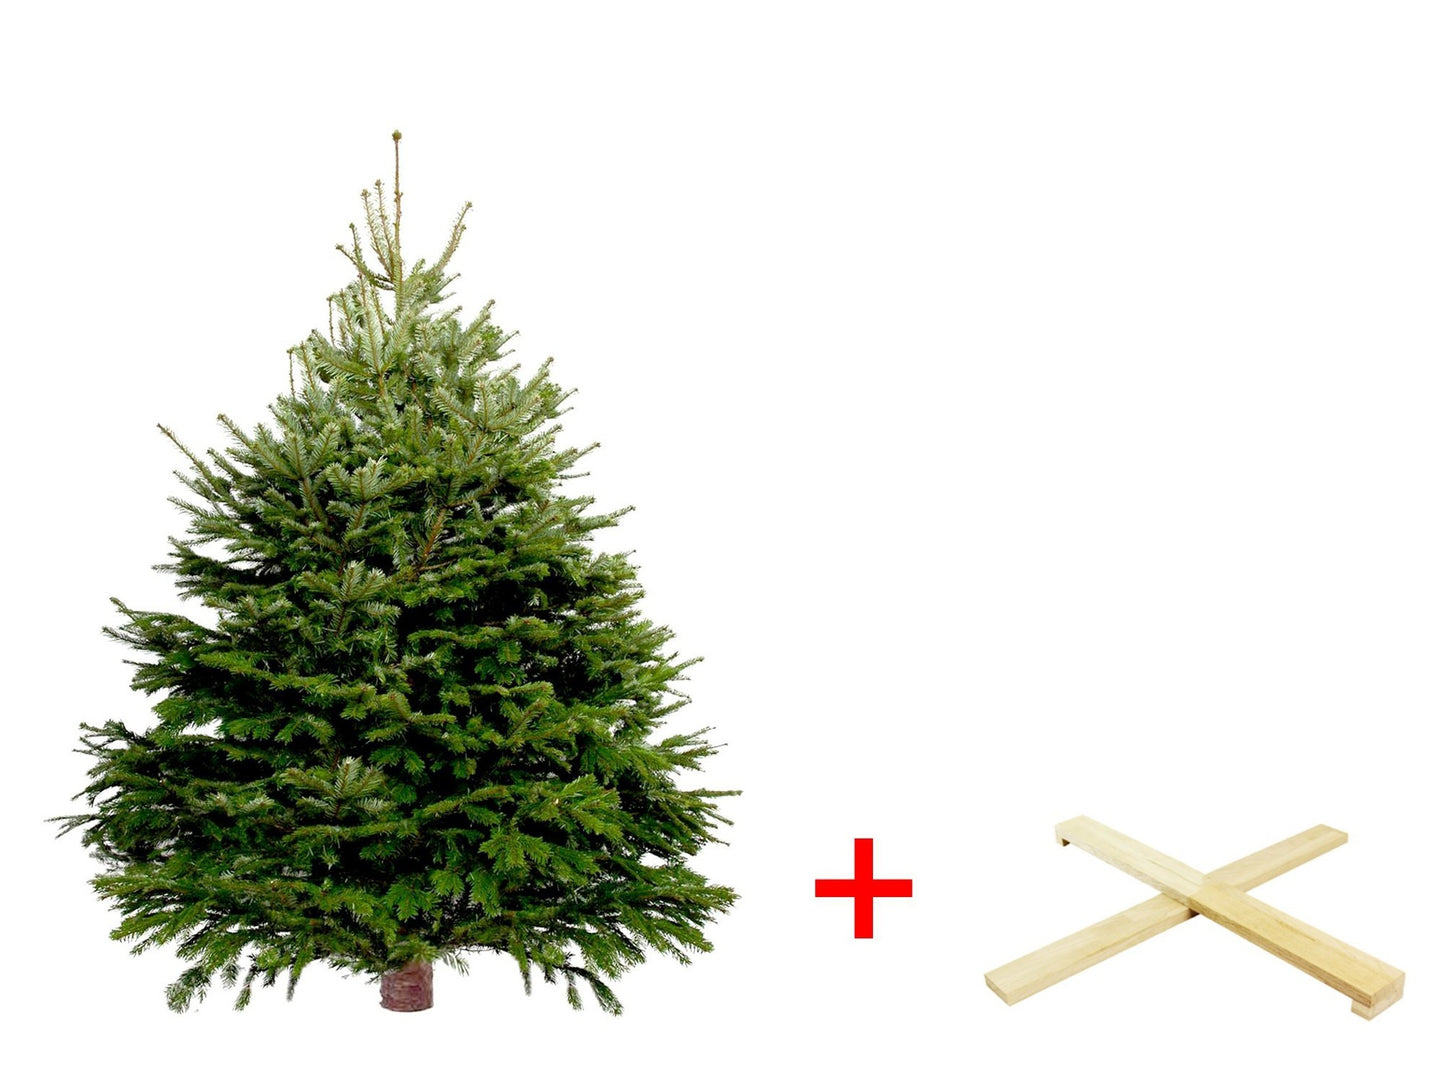 Lage christmas tree with wooden cross